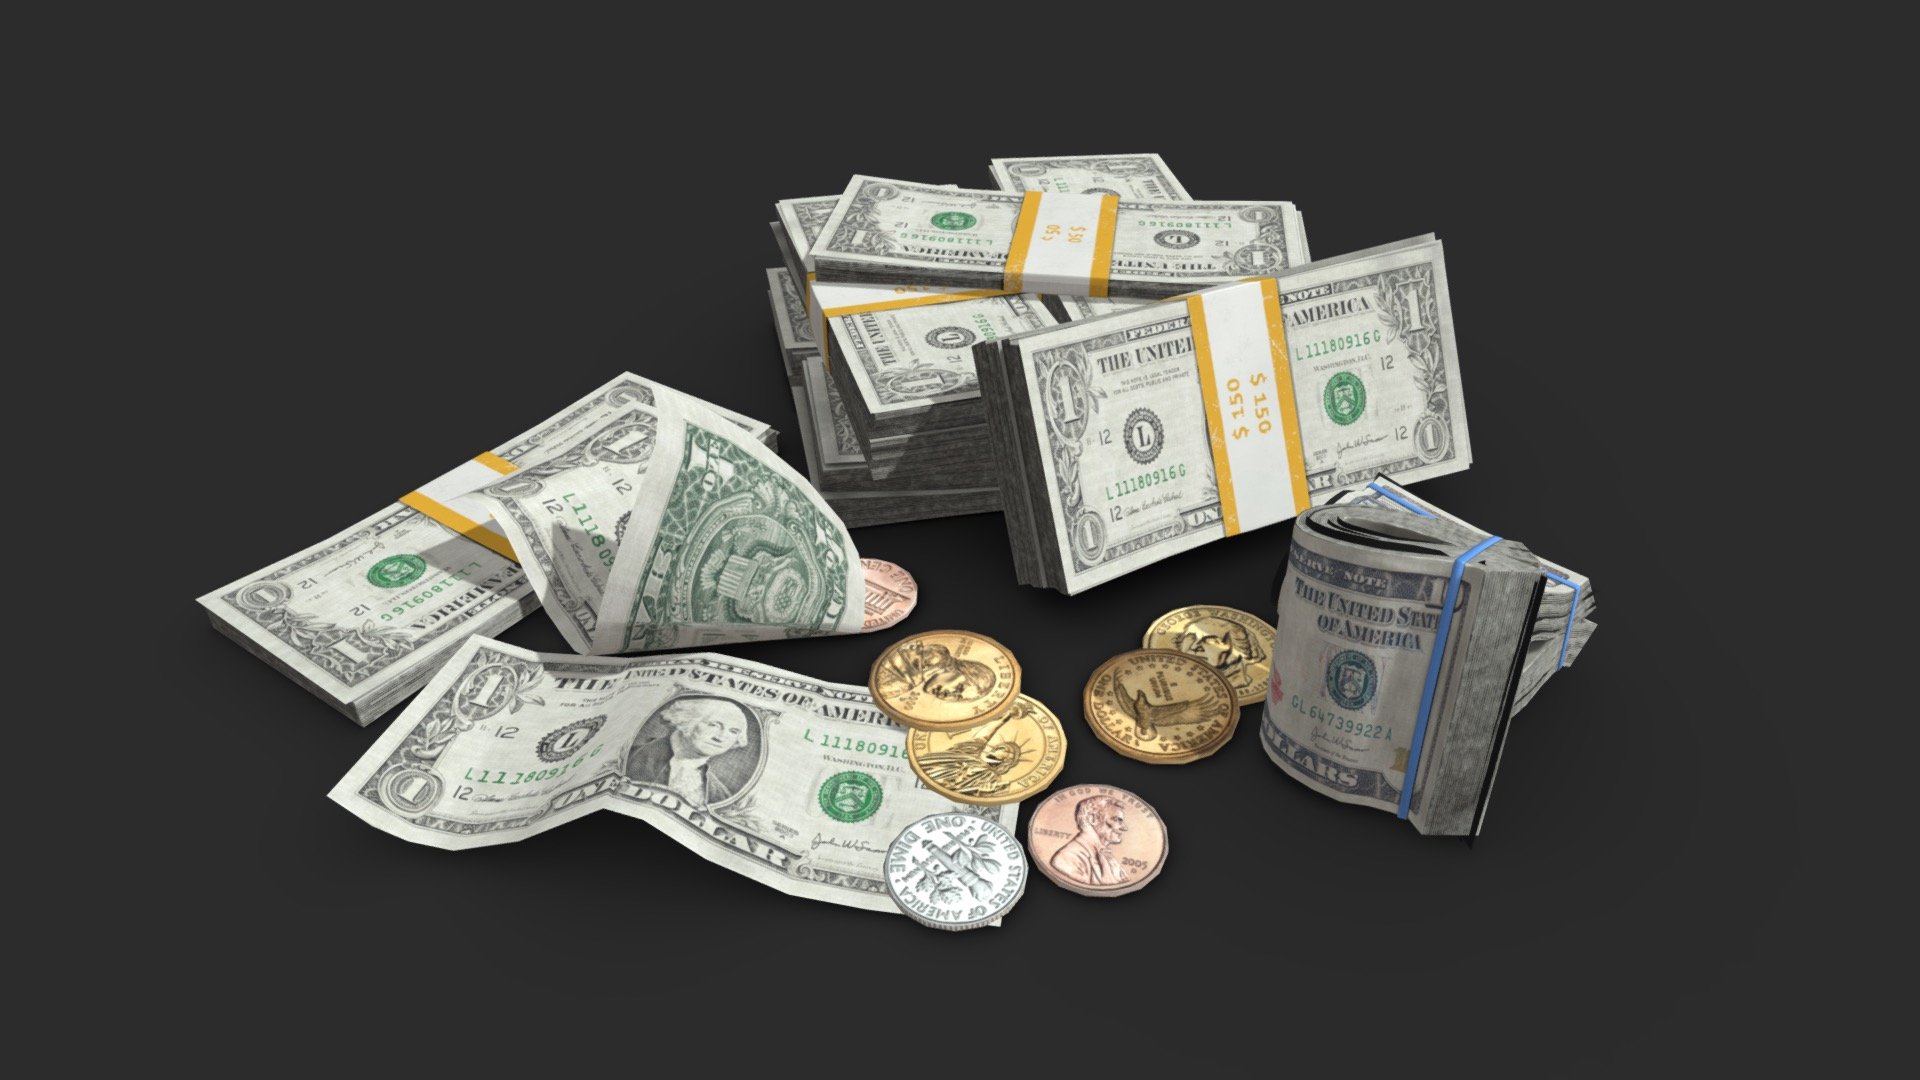 This American Dollars money loots including banknotes and coins includes 22 objects :




10 individuals banknotes (in 2 values)

4 different coins

3 banknote stacks

The assets can be used in any game (post-apocaliptic, first or third person, GTA like, survival… ). All objects share a unique material for the best optimization for games.

Those AAA game assets pack of money loots will embellish your scene and add more details which can help the gameplay, the game design or the level design.

All textures are PBR ready and available in 4K.

Low-poly model &amp; Blender native 3.1

SPECIFICATIONS




Objects : 22

Polygons : 4541

GAME SPECS




LODs : Yes (inside FBX for Unity &amp; Unreal)

Numbers of LODs : 2

Collider : No

EXPORTED FORMATS




FBX

Collada

OBJ

TEXTURES




Materials in scene : 1

Textures sizes : 4K

Textures types : Base Color, Metallic, Roughness, Normal (DirectX &amp; OpenGL), Heigh &amp; AO (also Unity &amp; Unreal ARM workflow maps)

Textures format : PNG
 - Money Loot - US Dollars - Buy Royalty Free 3D model by KangaroOz 3D (@KangaroOz-3D) 3d model